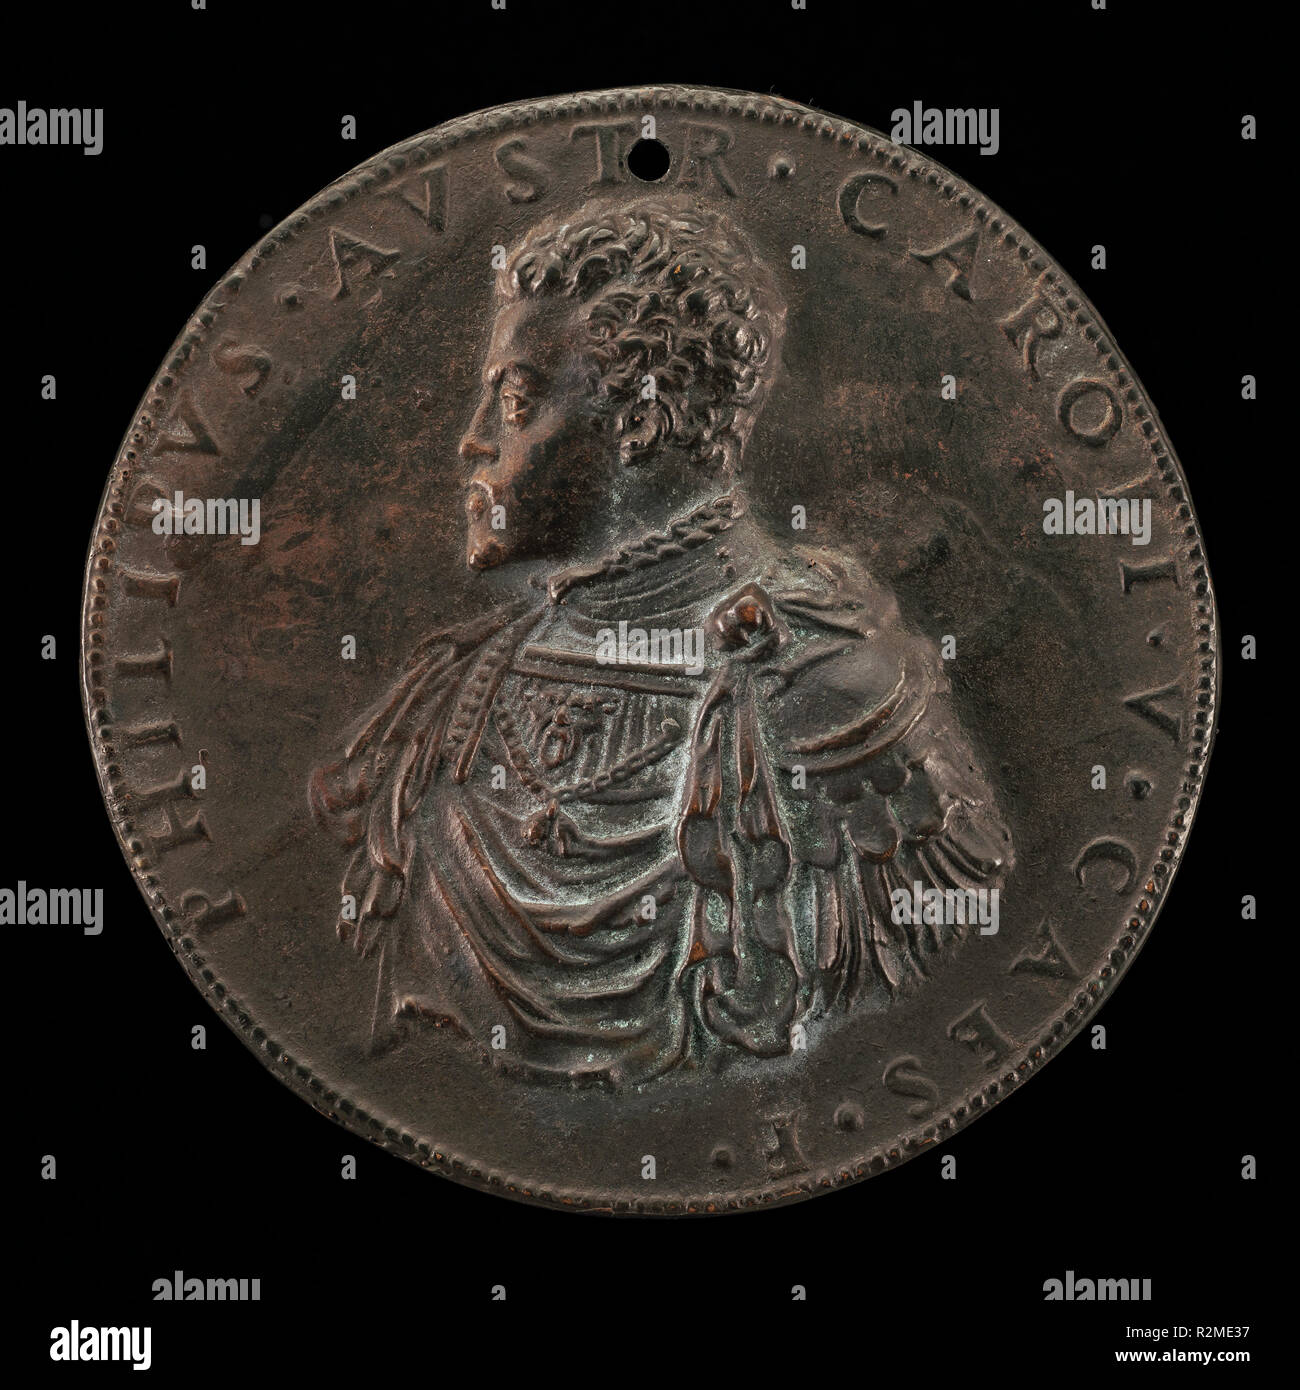 The Future Philip II of Spain as Prince of Austria [obverse]. Dated: 1548/1549. Dimensions: overall (diameter): 7.8 cm (3 1/16 in.). Medium: bronze. Museum: National Gallery of Art, Washington DC. Author: LEONE LEONI. Stock Photo